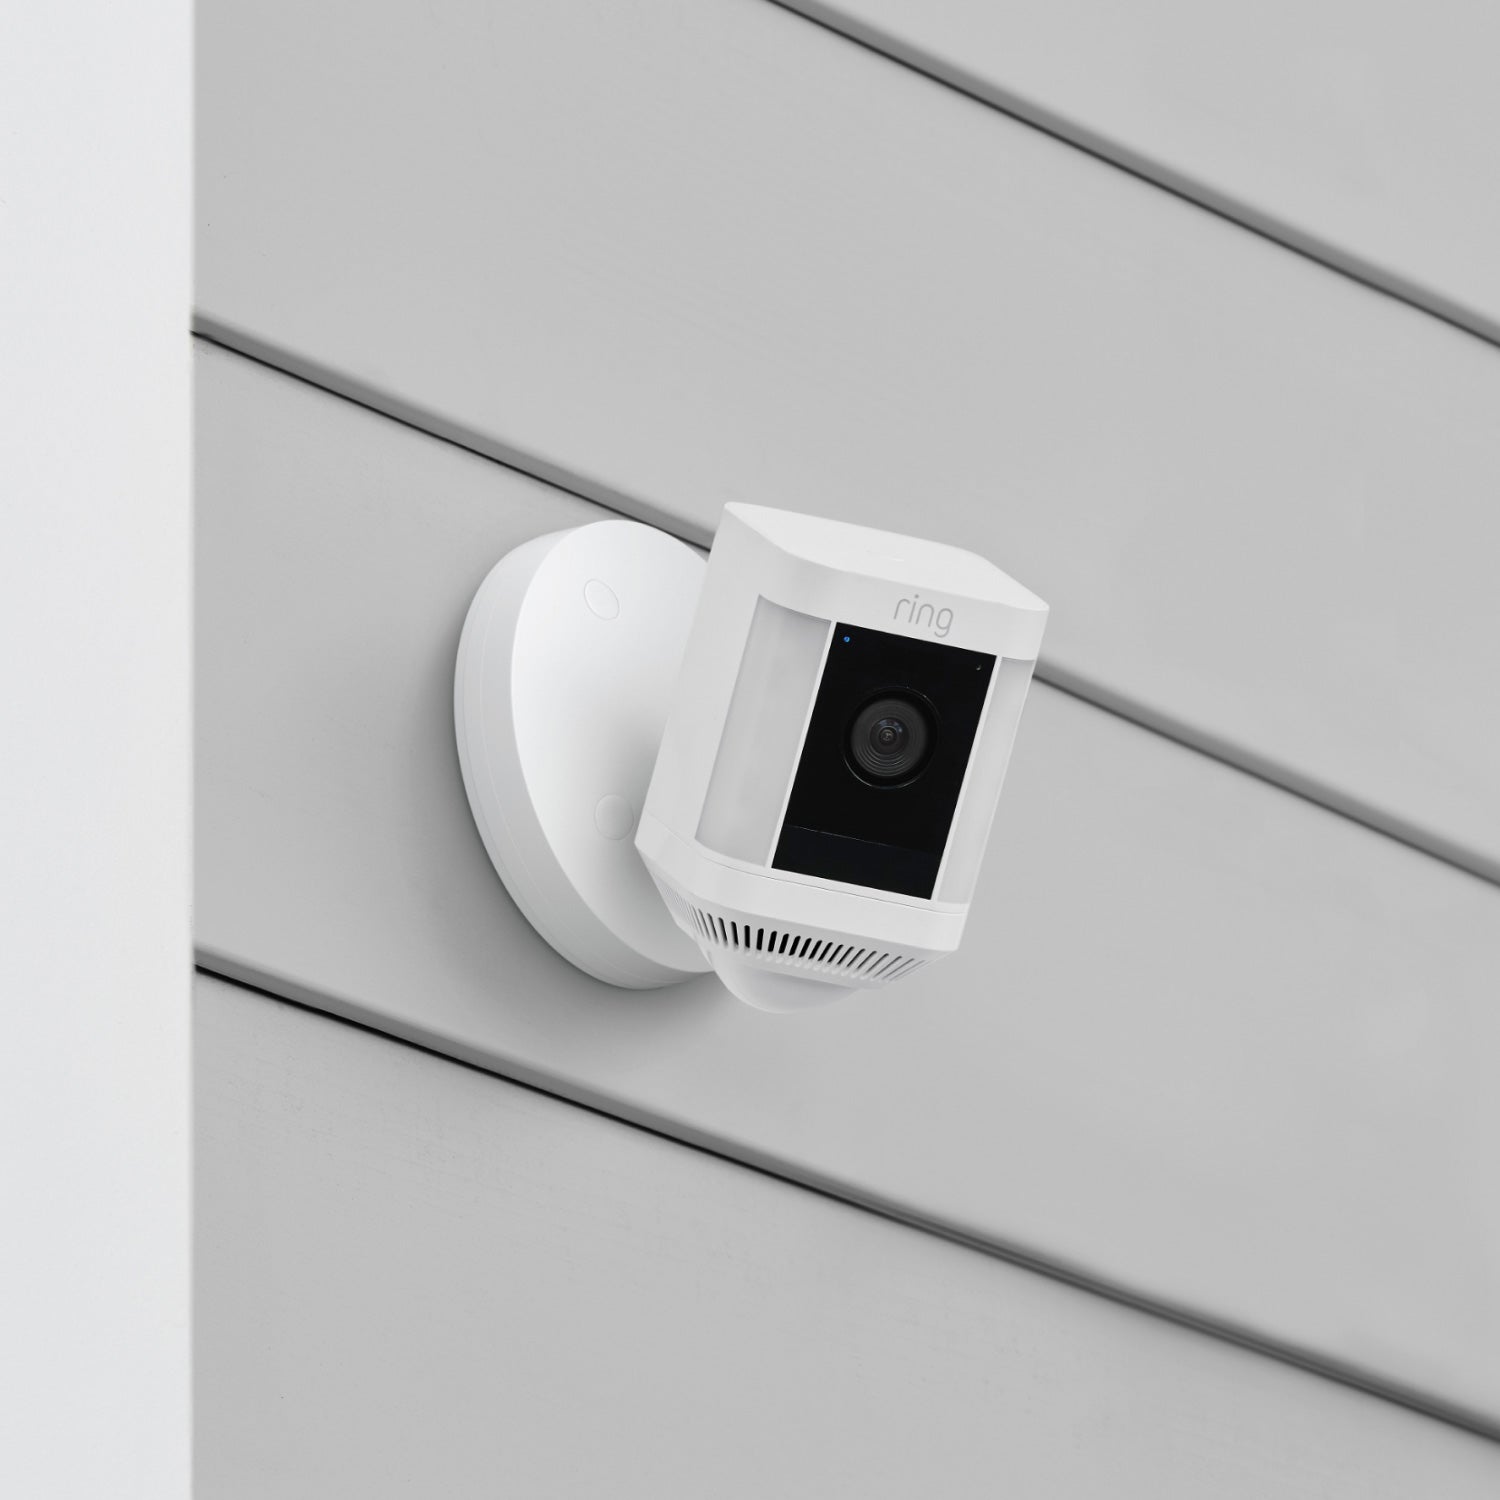 Spotlight Cam Plus (Wired) - Spotlight Cam Plus, Wired model in white, mounted on exterior wall of home.